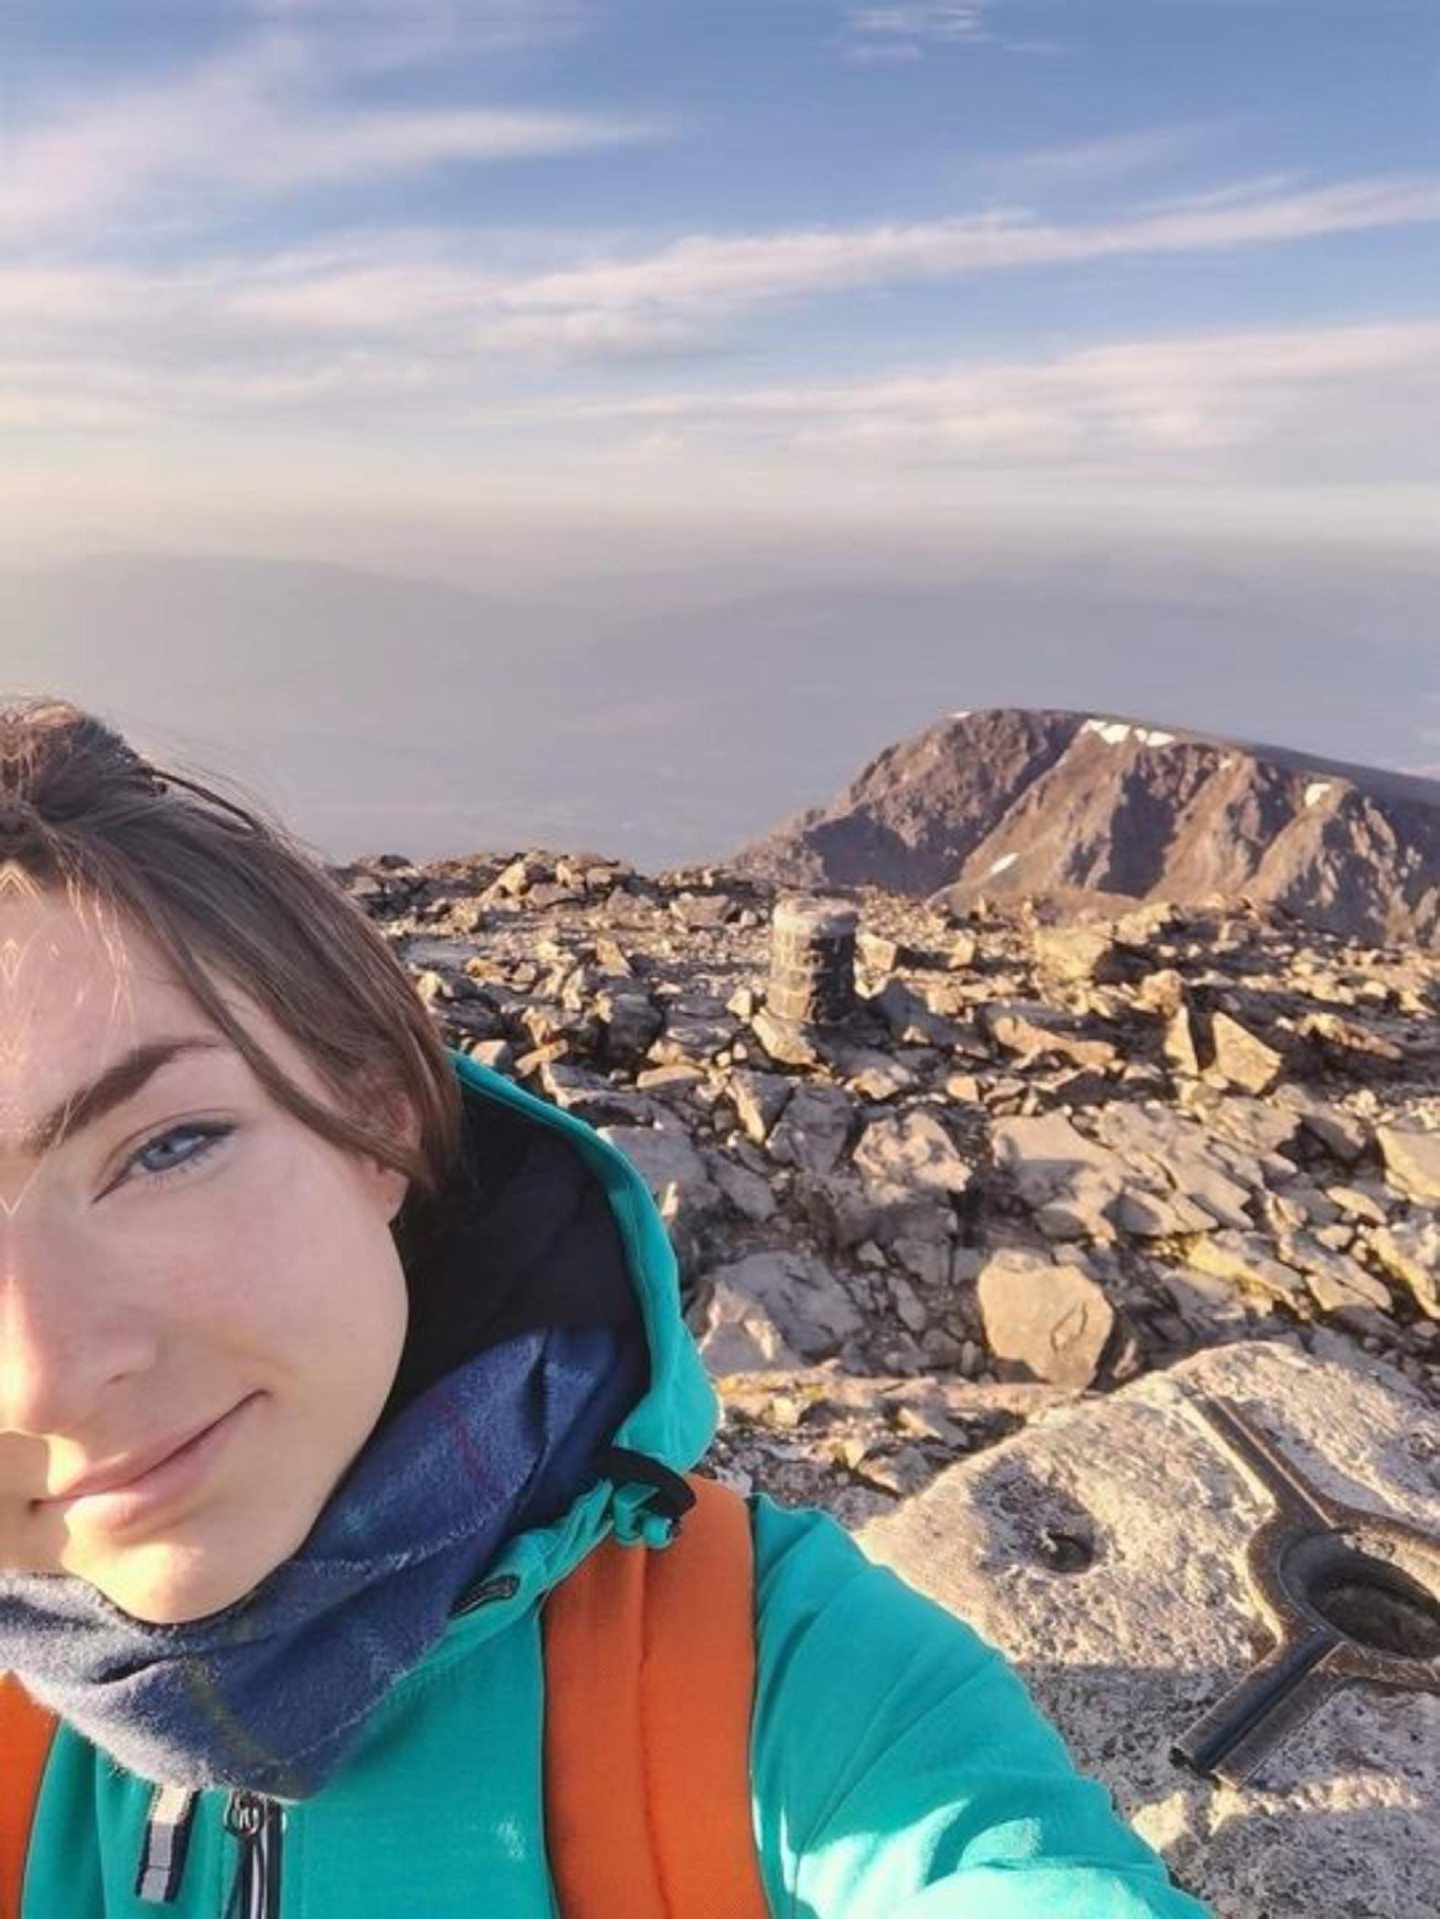 Sarah's last selfie on the top of Ben Nevis before she fell.